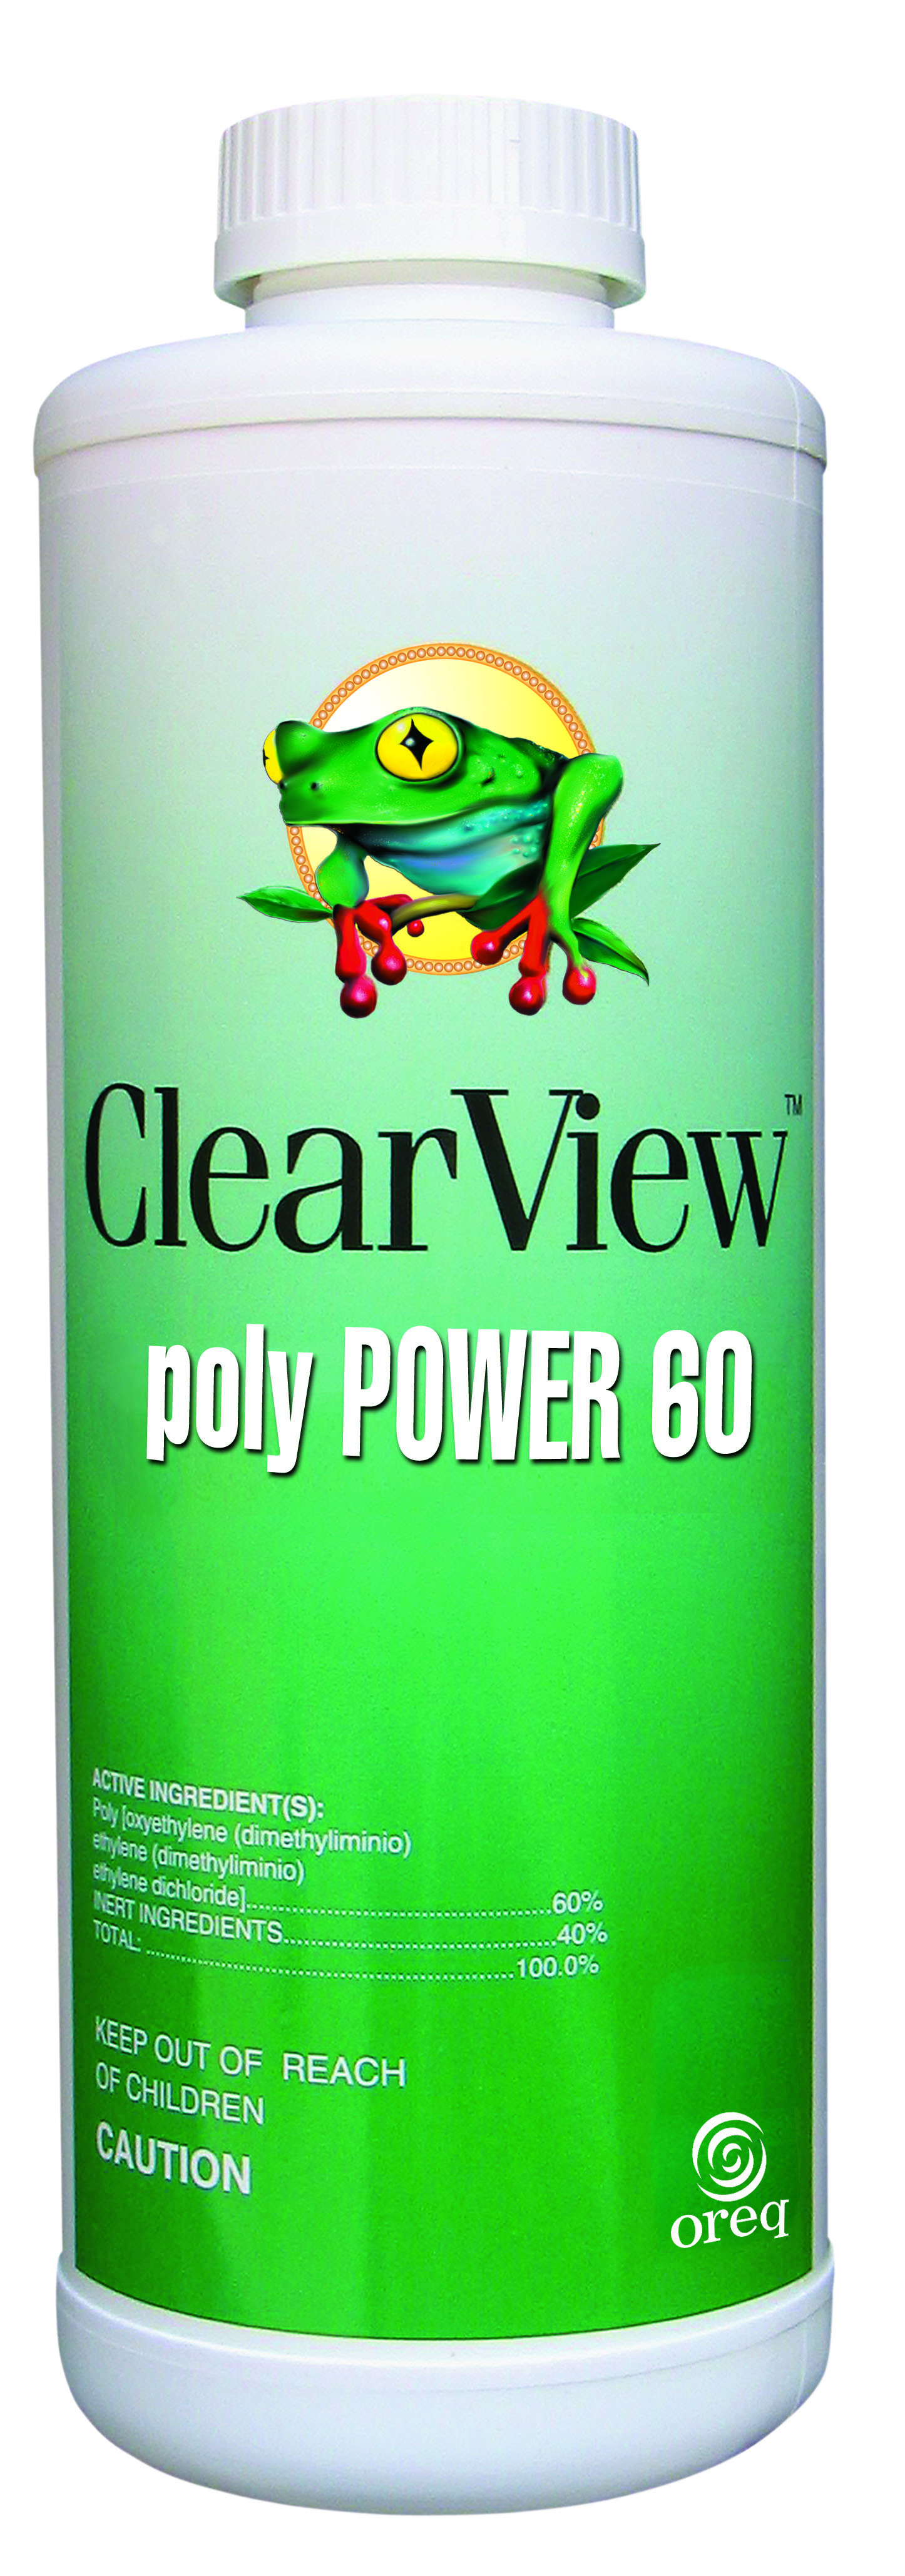 Clearview Polypower 60 12 X 1 qt - LINERS